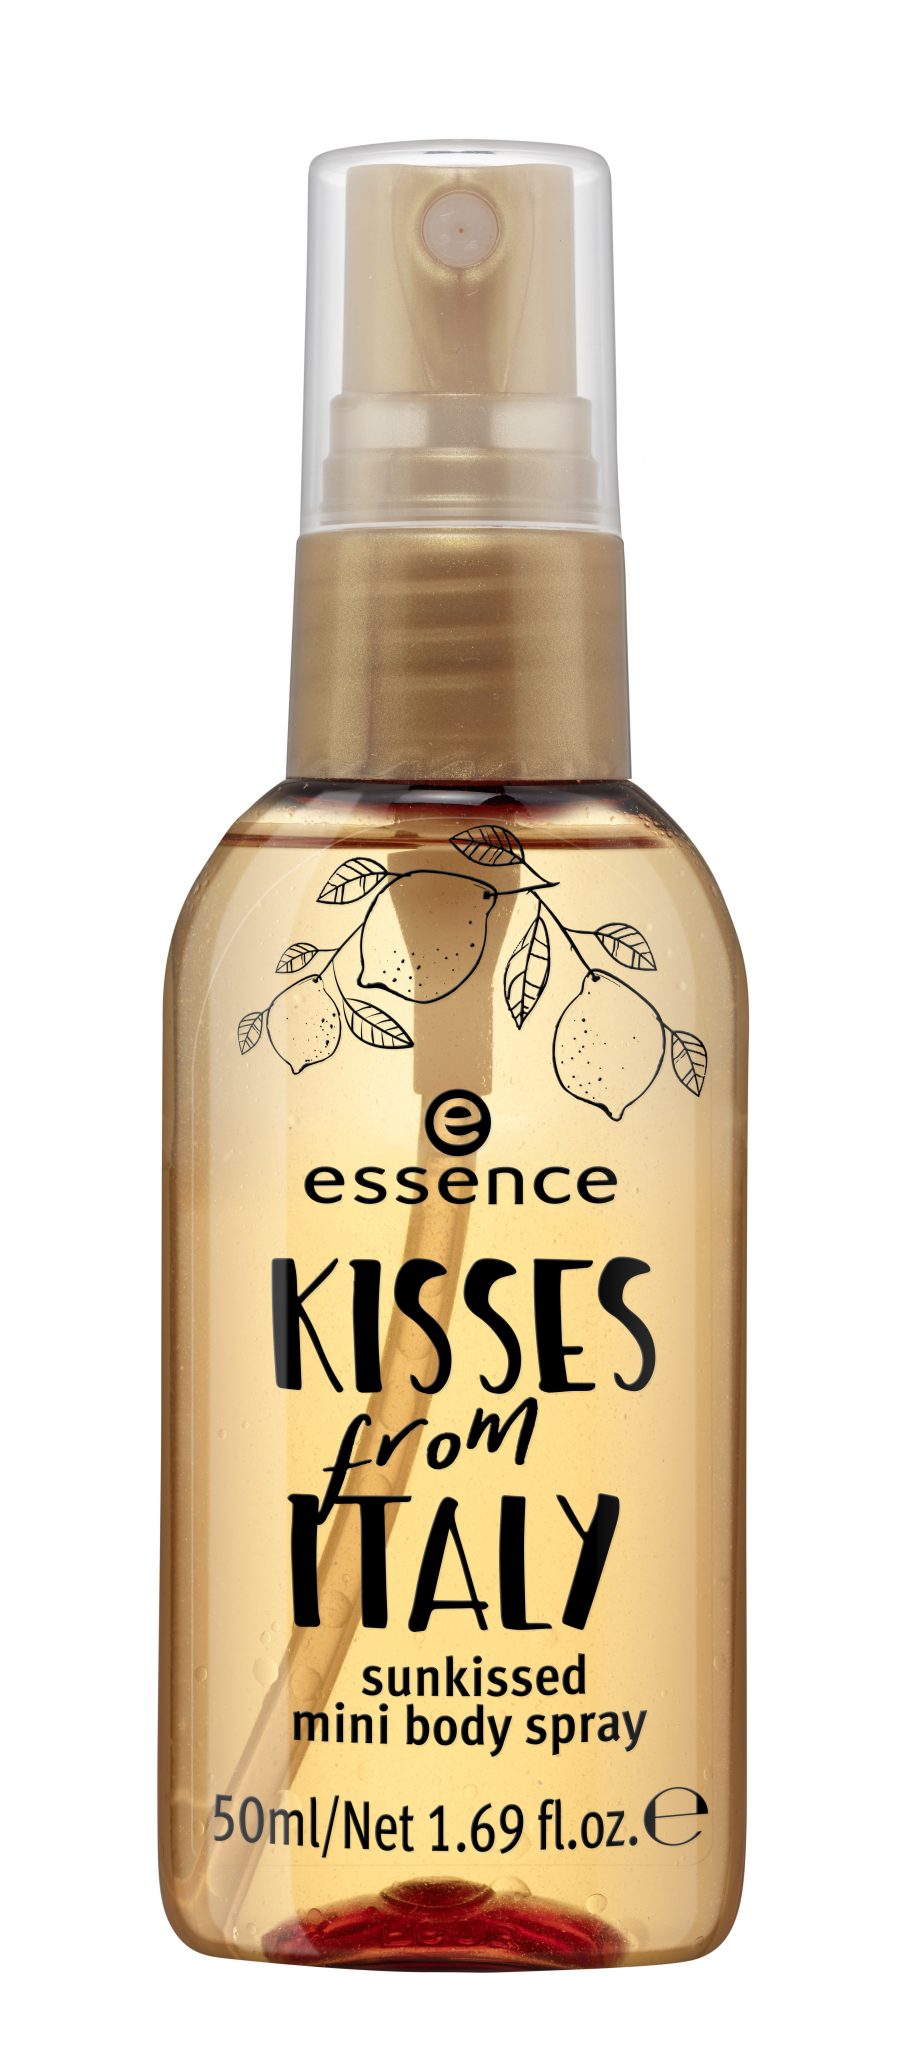 ess kisses from italy mini sunkissed body spray